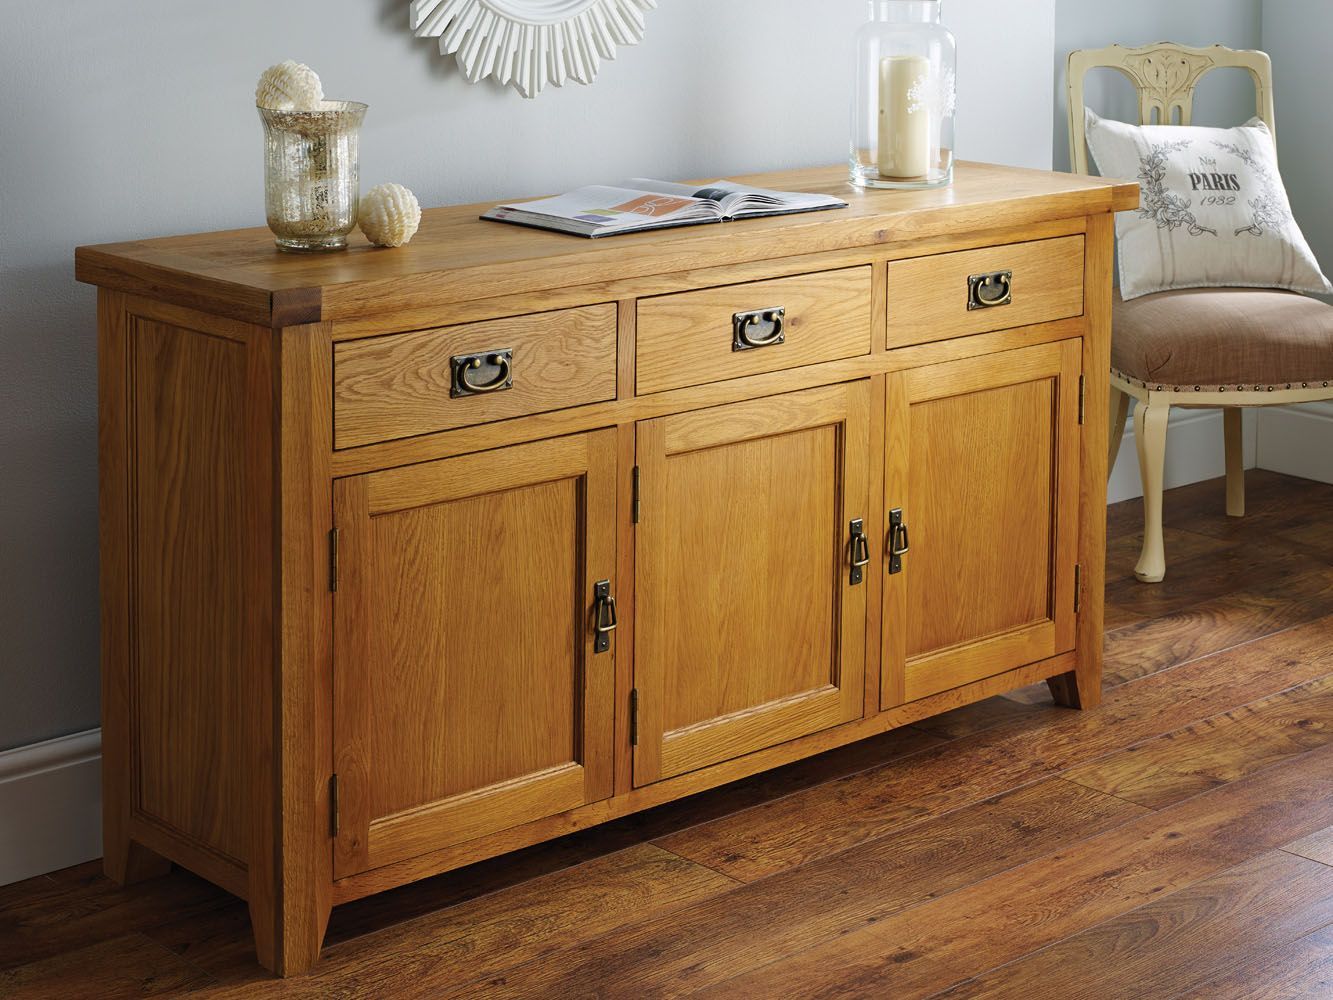 Country Oak 160cm Large Rustic Oak Sideboard With Recent Rustic Oak Sideboards (View 3 of 15)